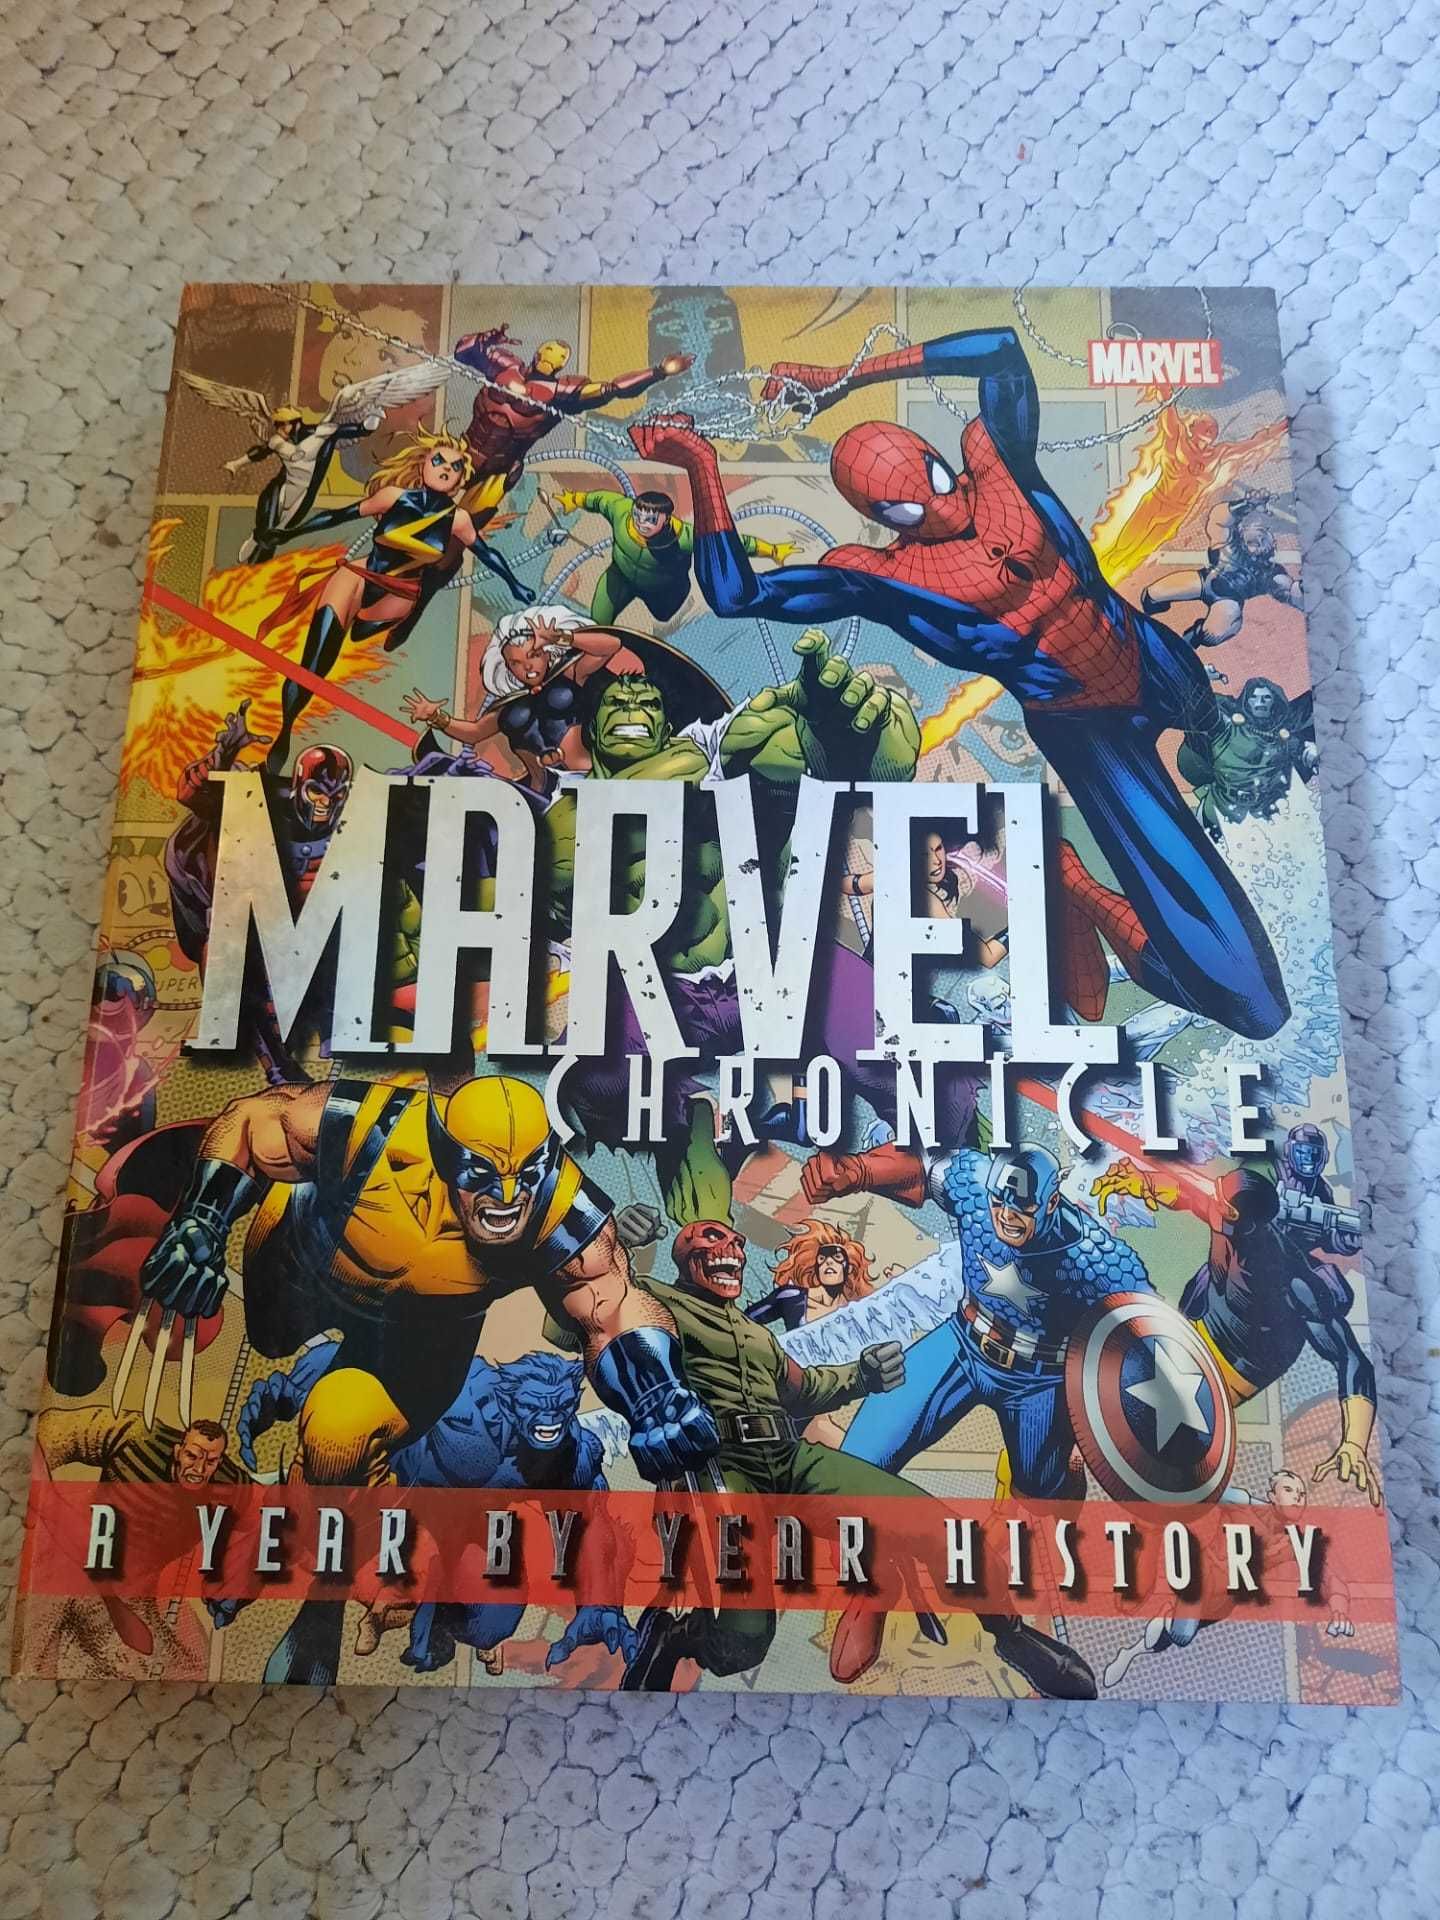 Marvel Chronicle - A Year By Year History